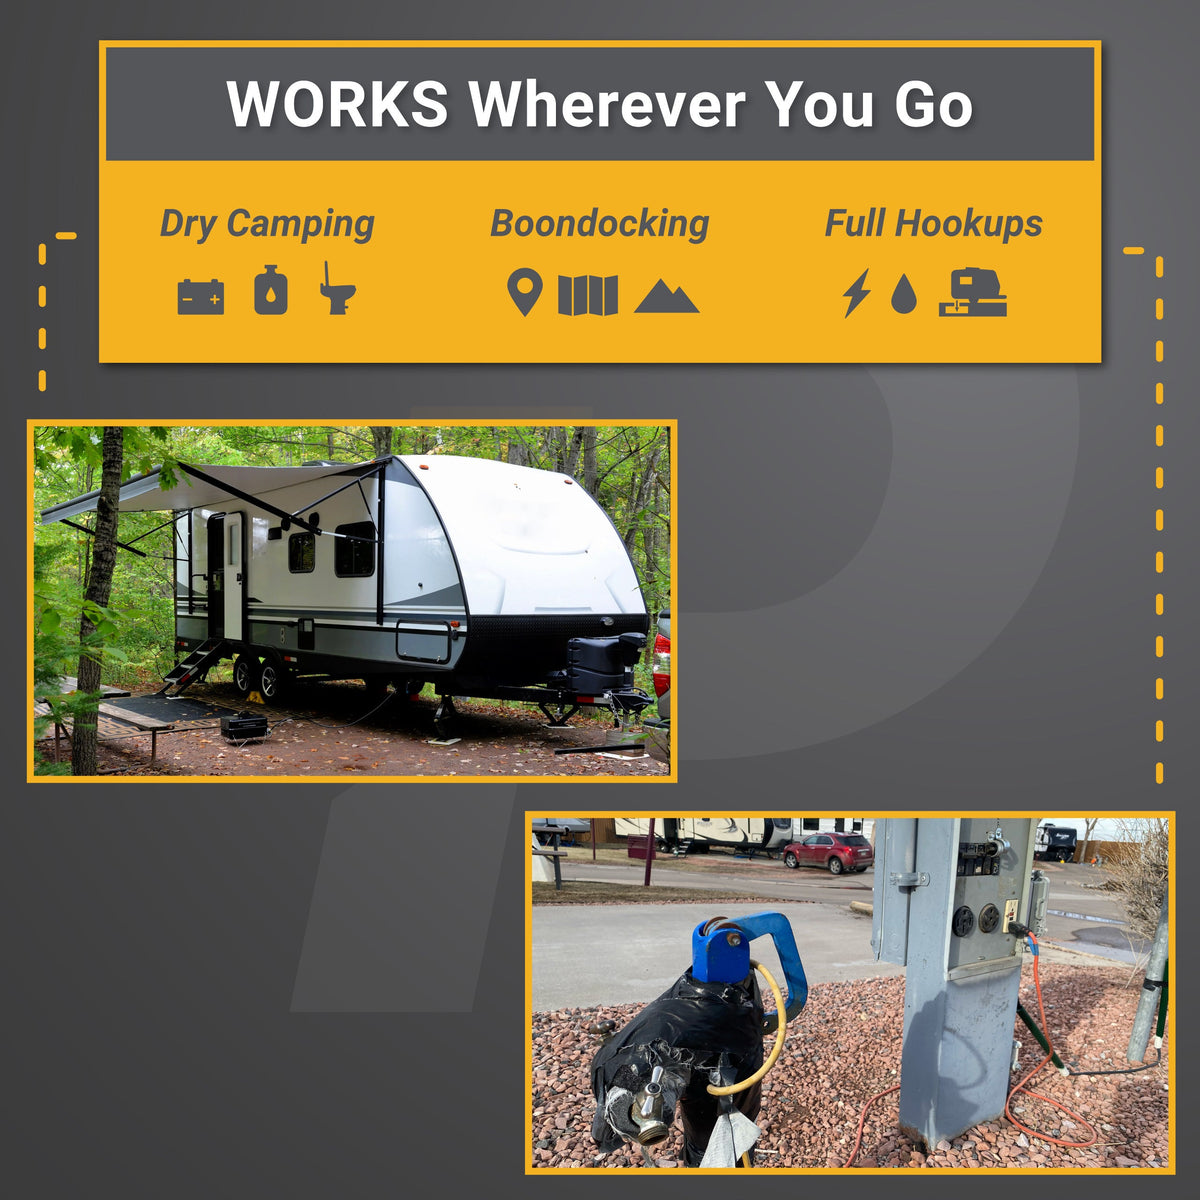 Works whenever you go, works for Dry Camping, Boondocking, and Full Hookups